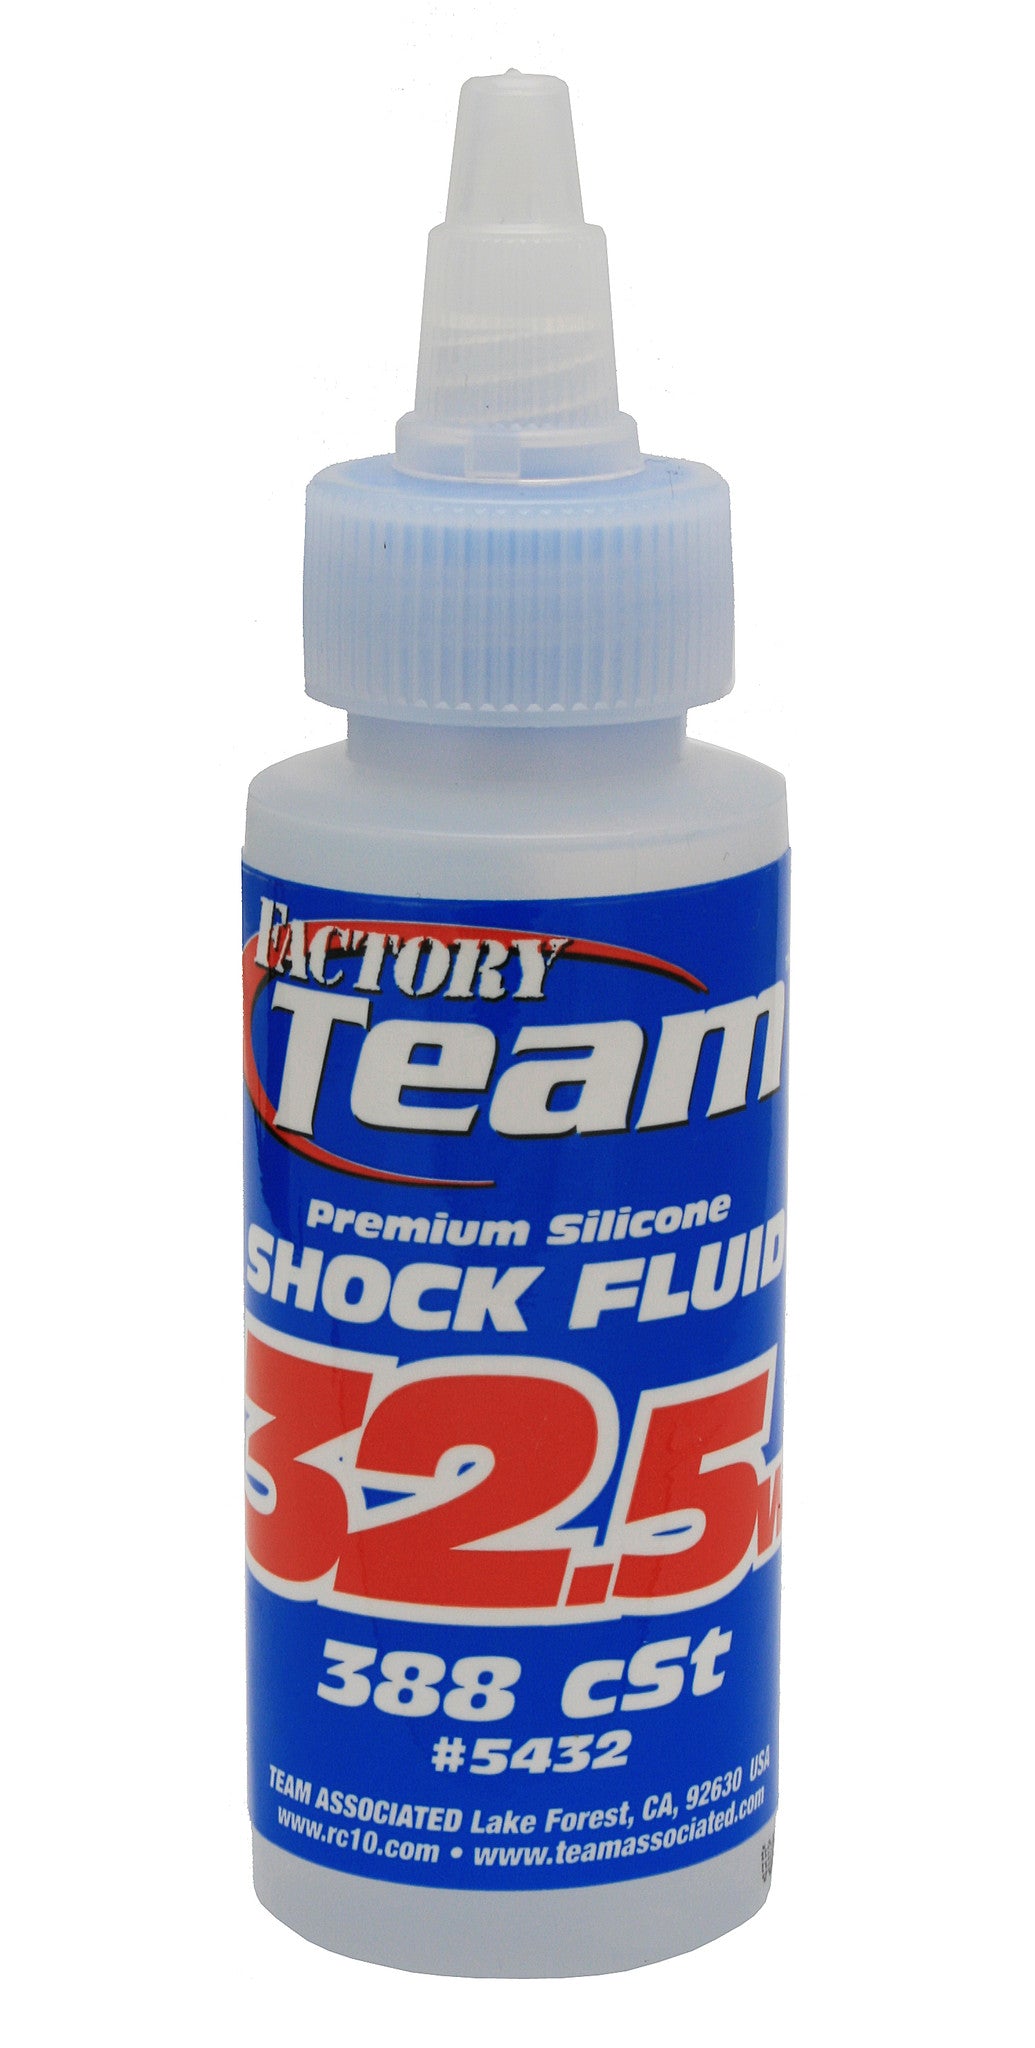 ASSOCIATED 5432 Silicone Shock Fluid 32.5wt 388cst